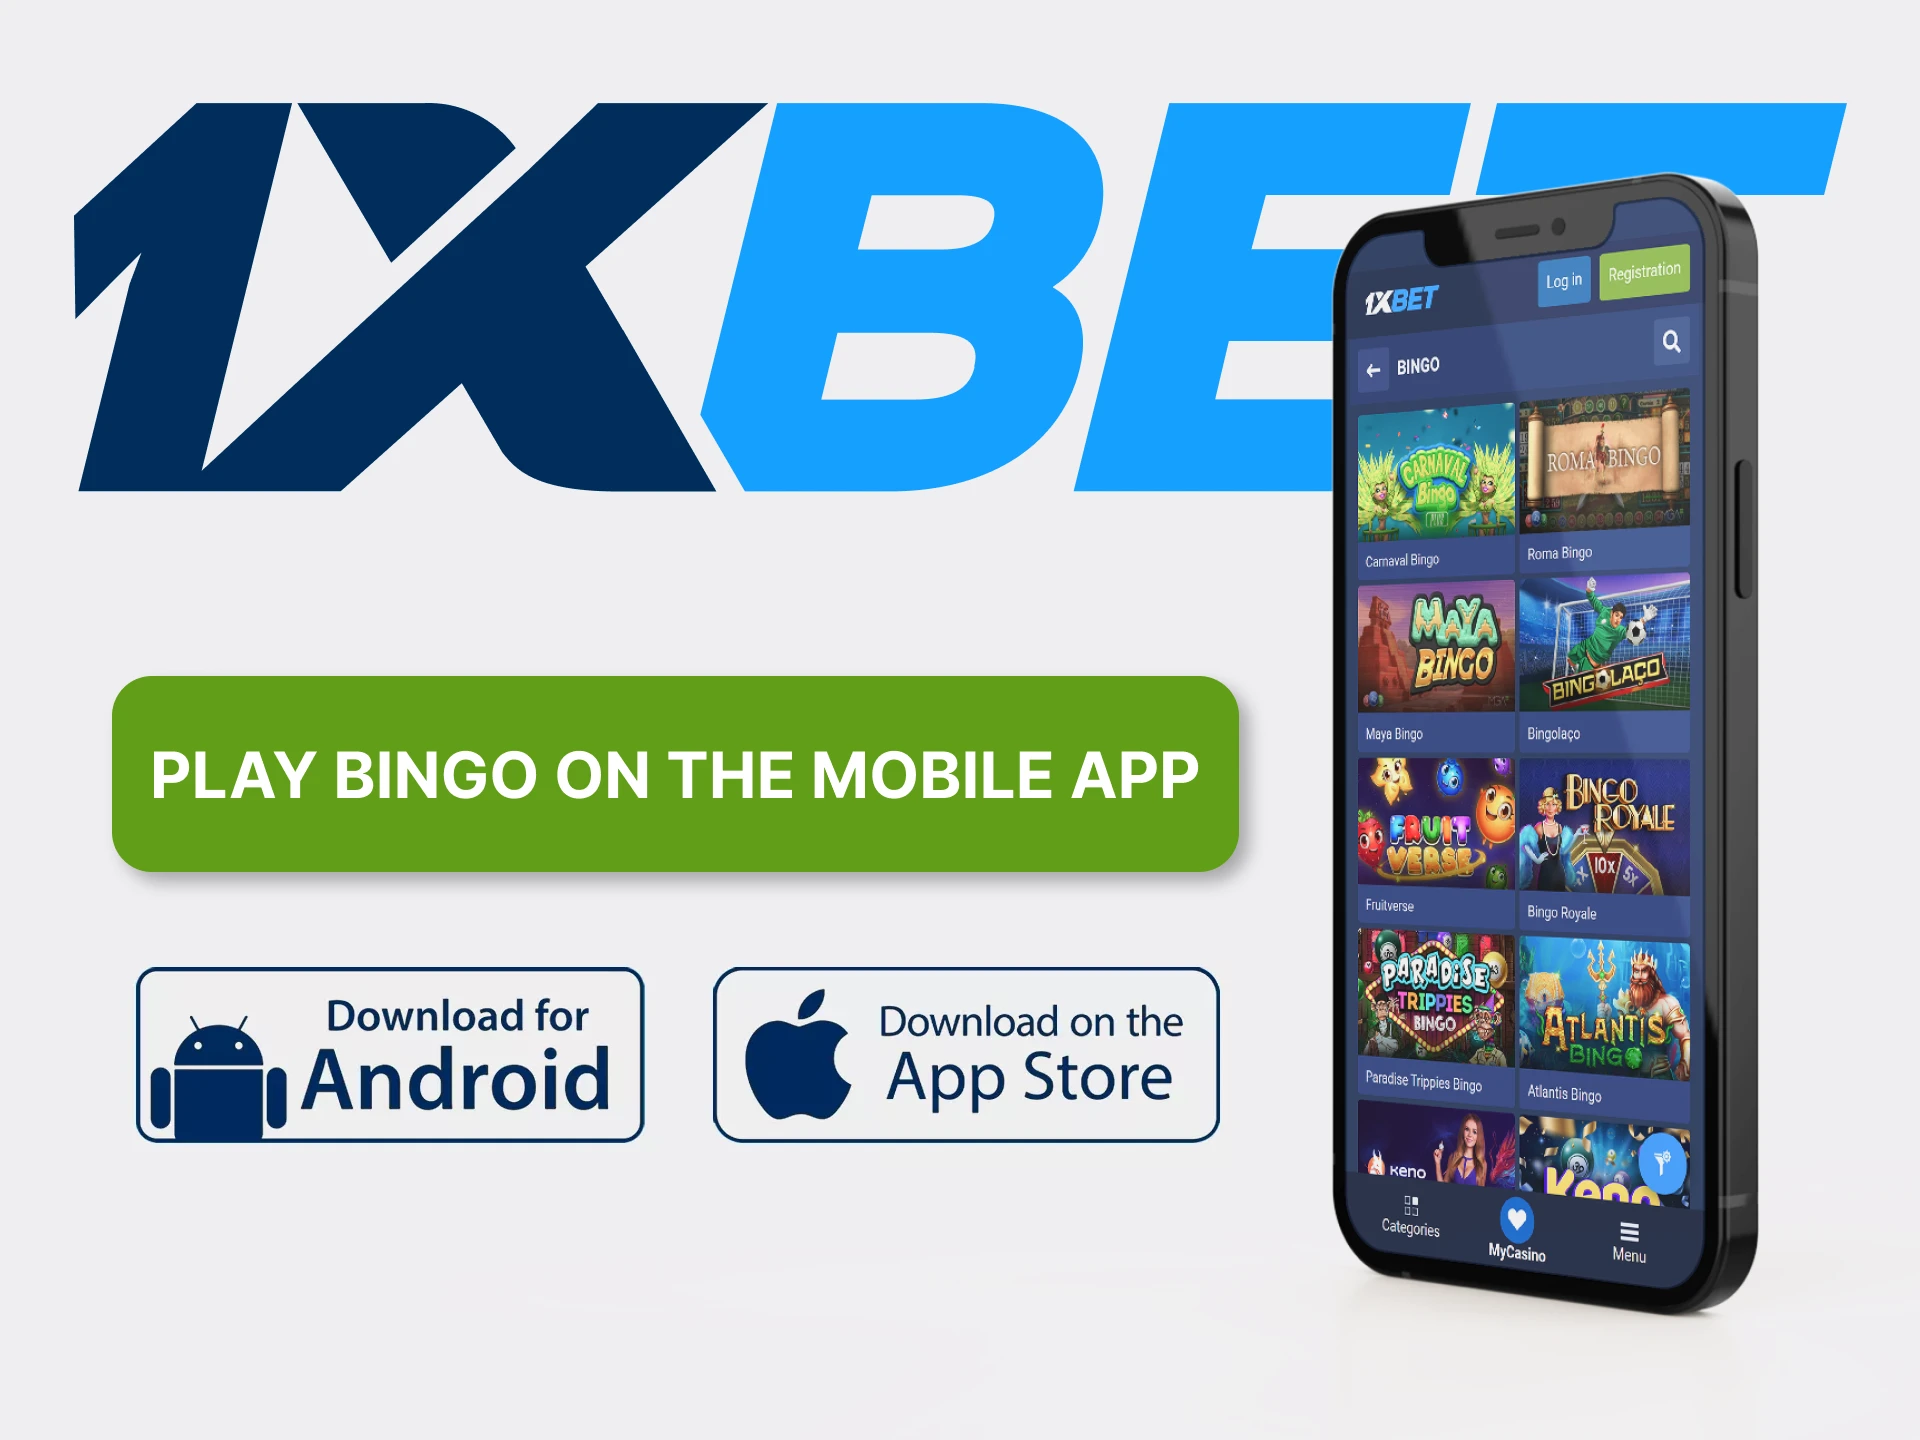 With 1xBet you can play bingo directly from your phone, just install a handy app.